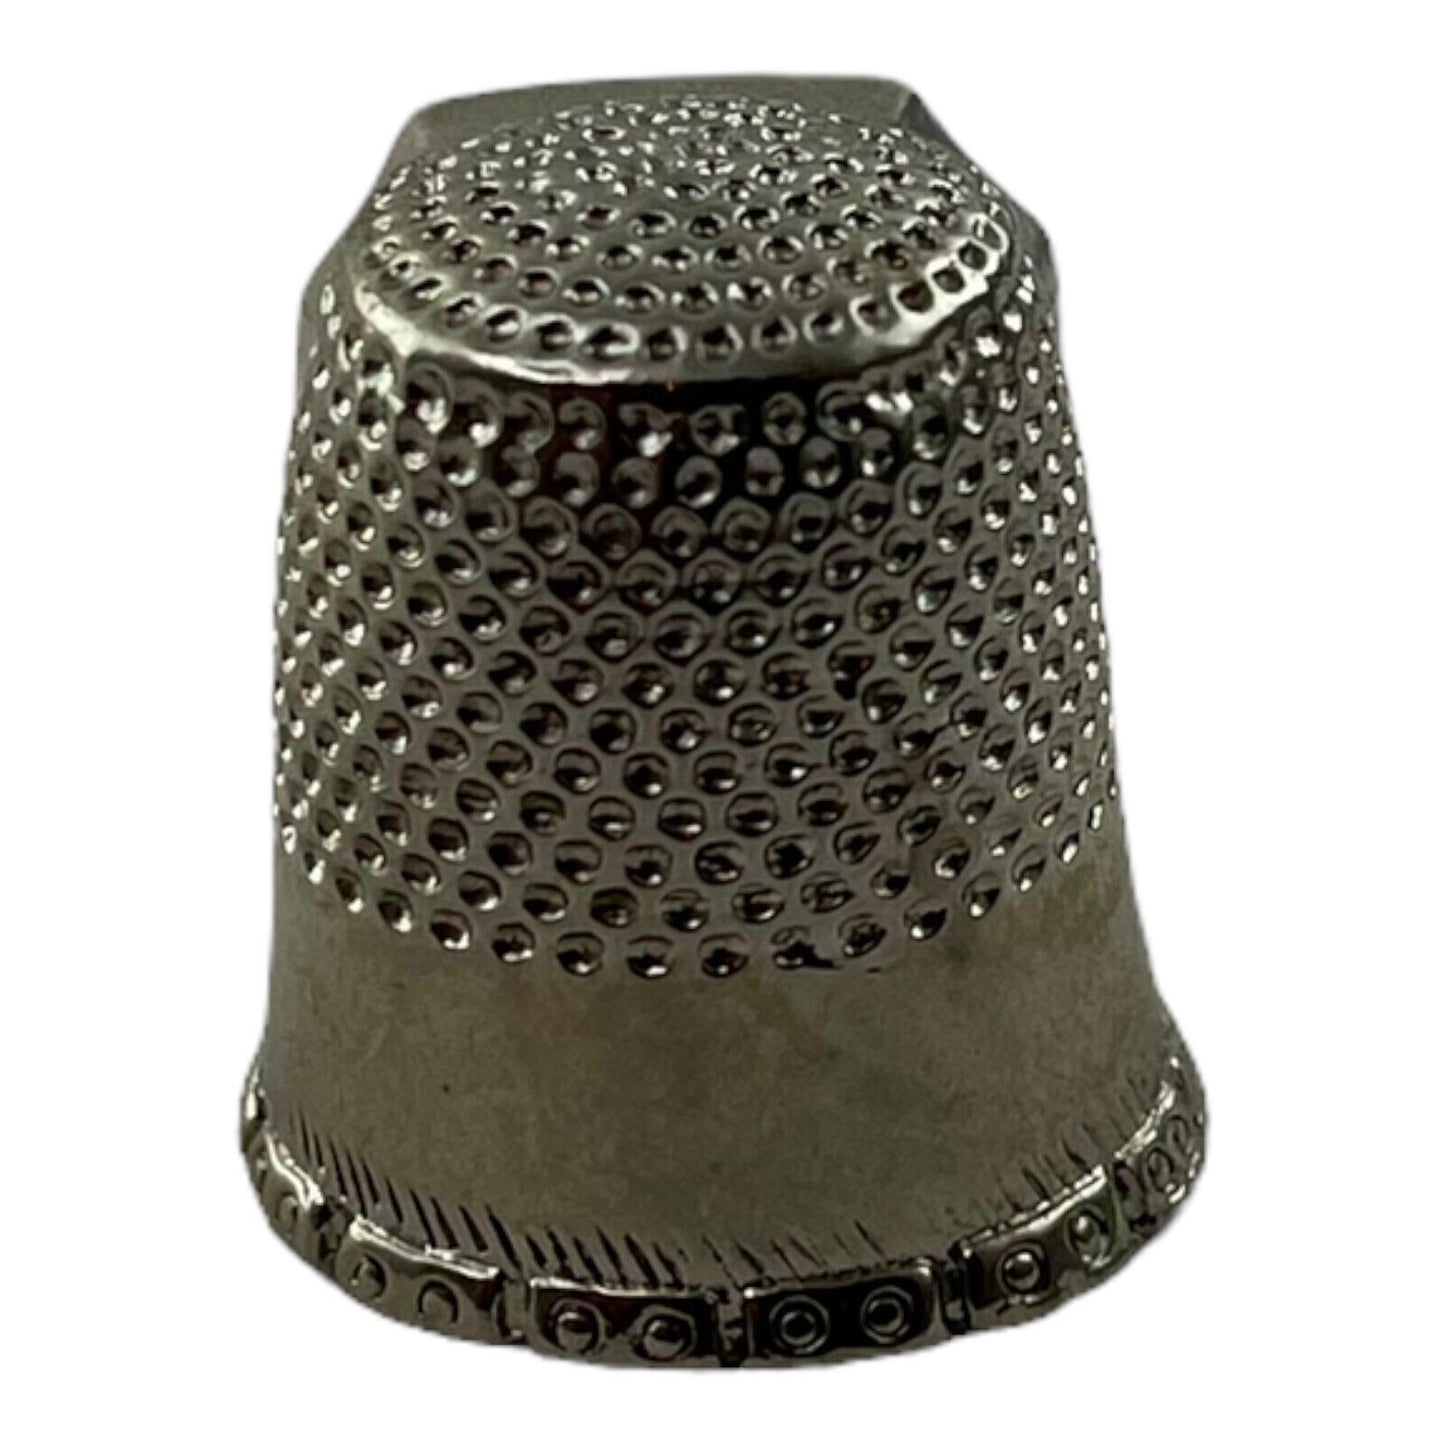 Smithsonian Institution .75 Inch Metal Thimble